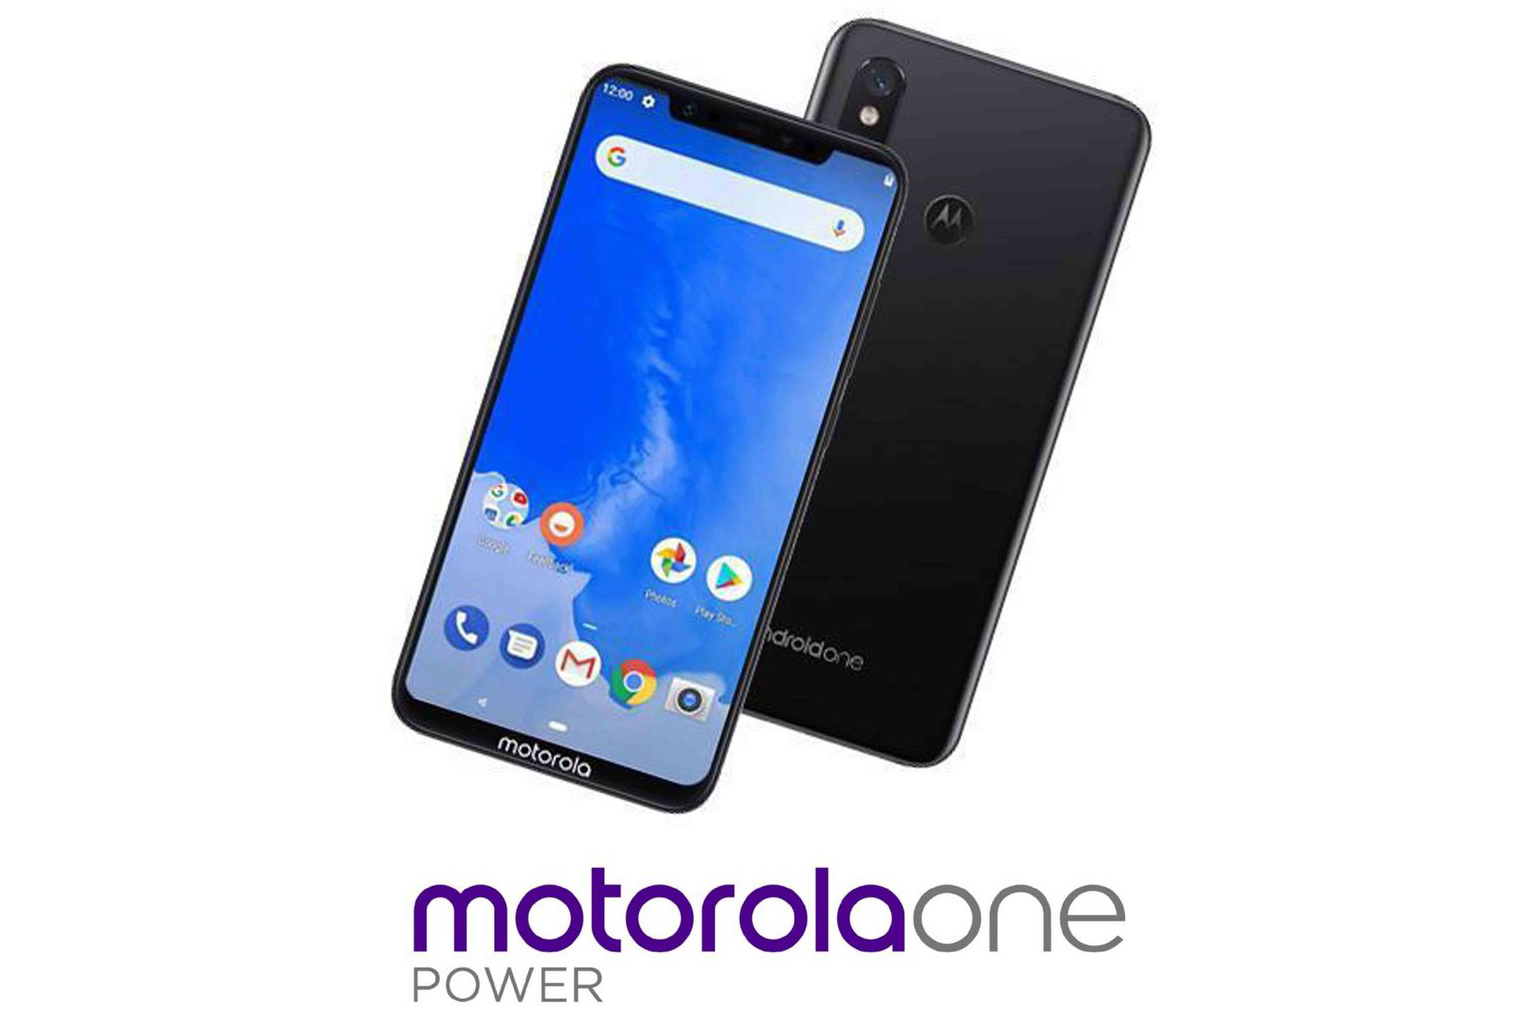 Motorola One Power the adequately specd Android One phone leaks once again